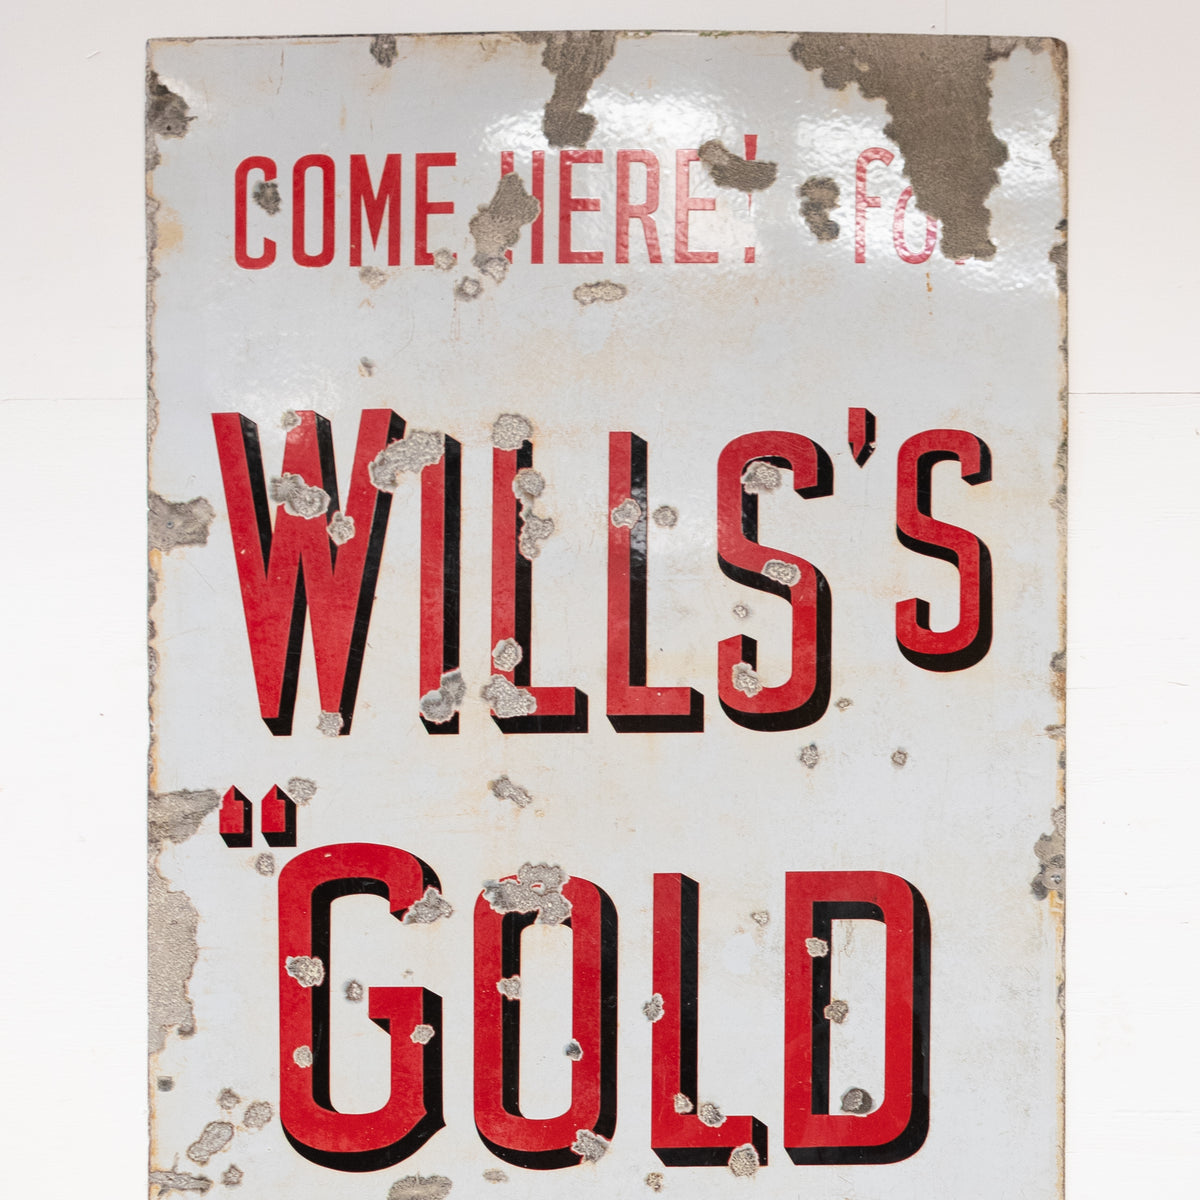 Large Vintage Enamel Advertising Sign: Will&#39;s Gold Flake Cigarette | The Architectural Forum